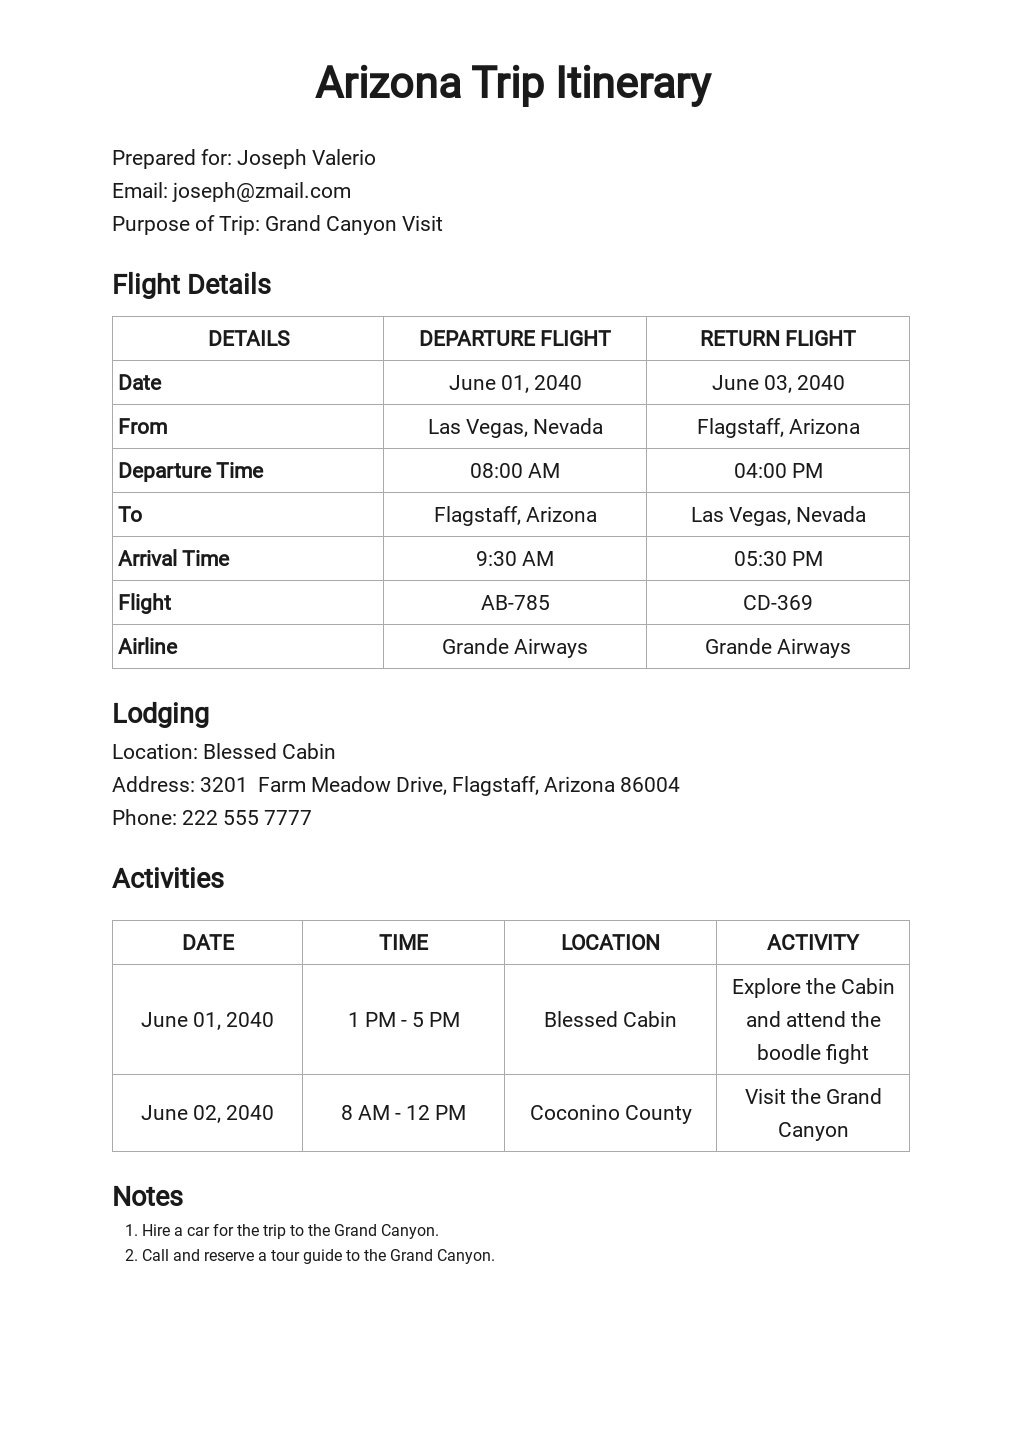 FREE Itinerary Templates in Microsoft Word (DOC)